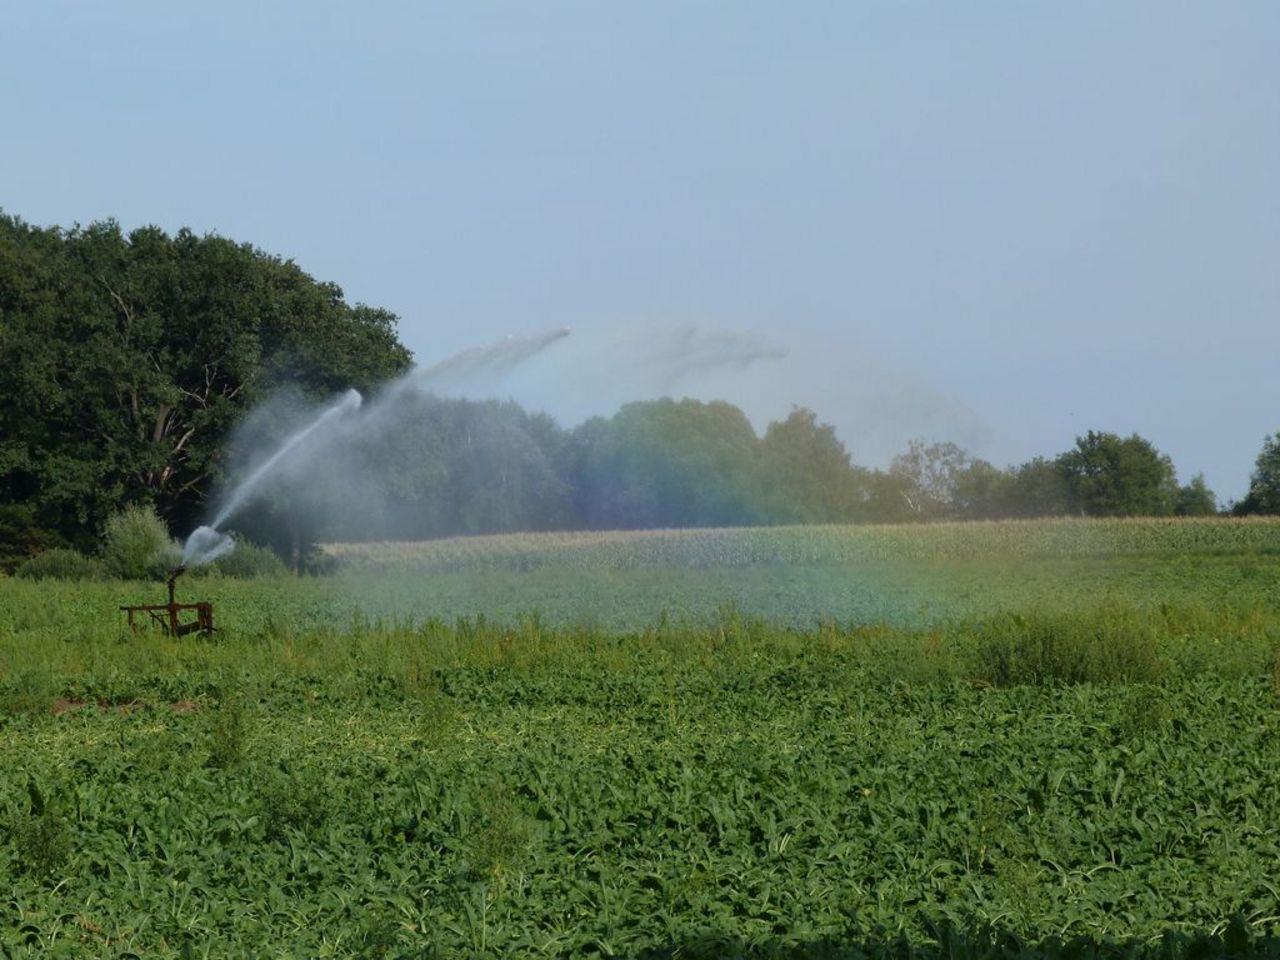 Creation of a rainbow by the falling water from an irrigation cannon on a sugar beet field